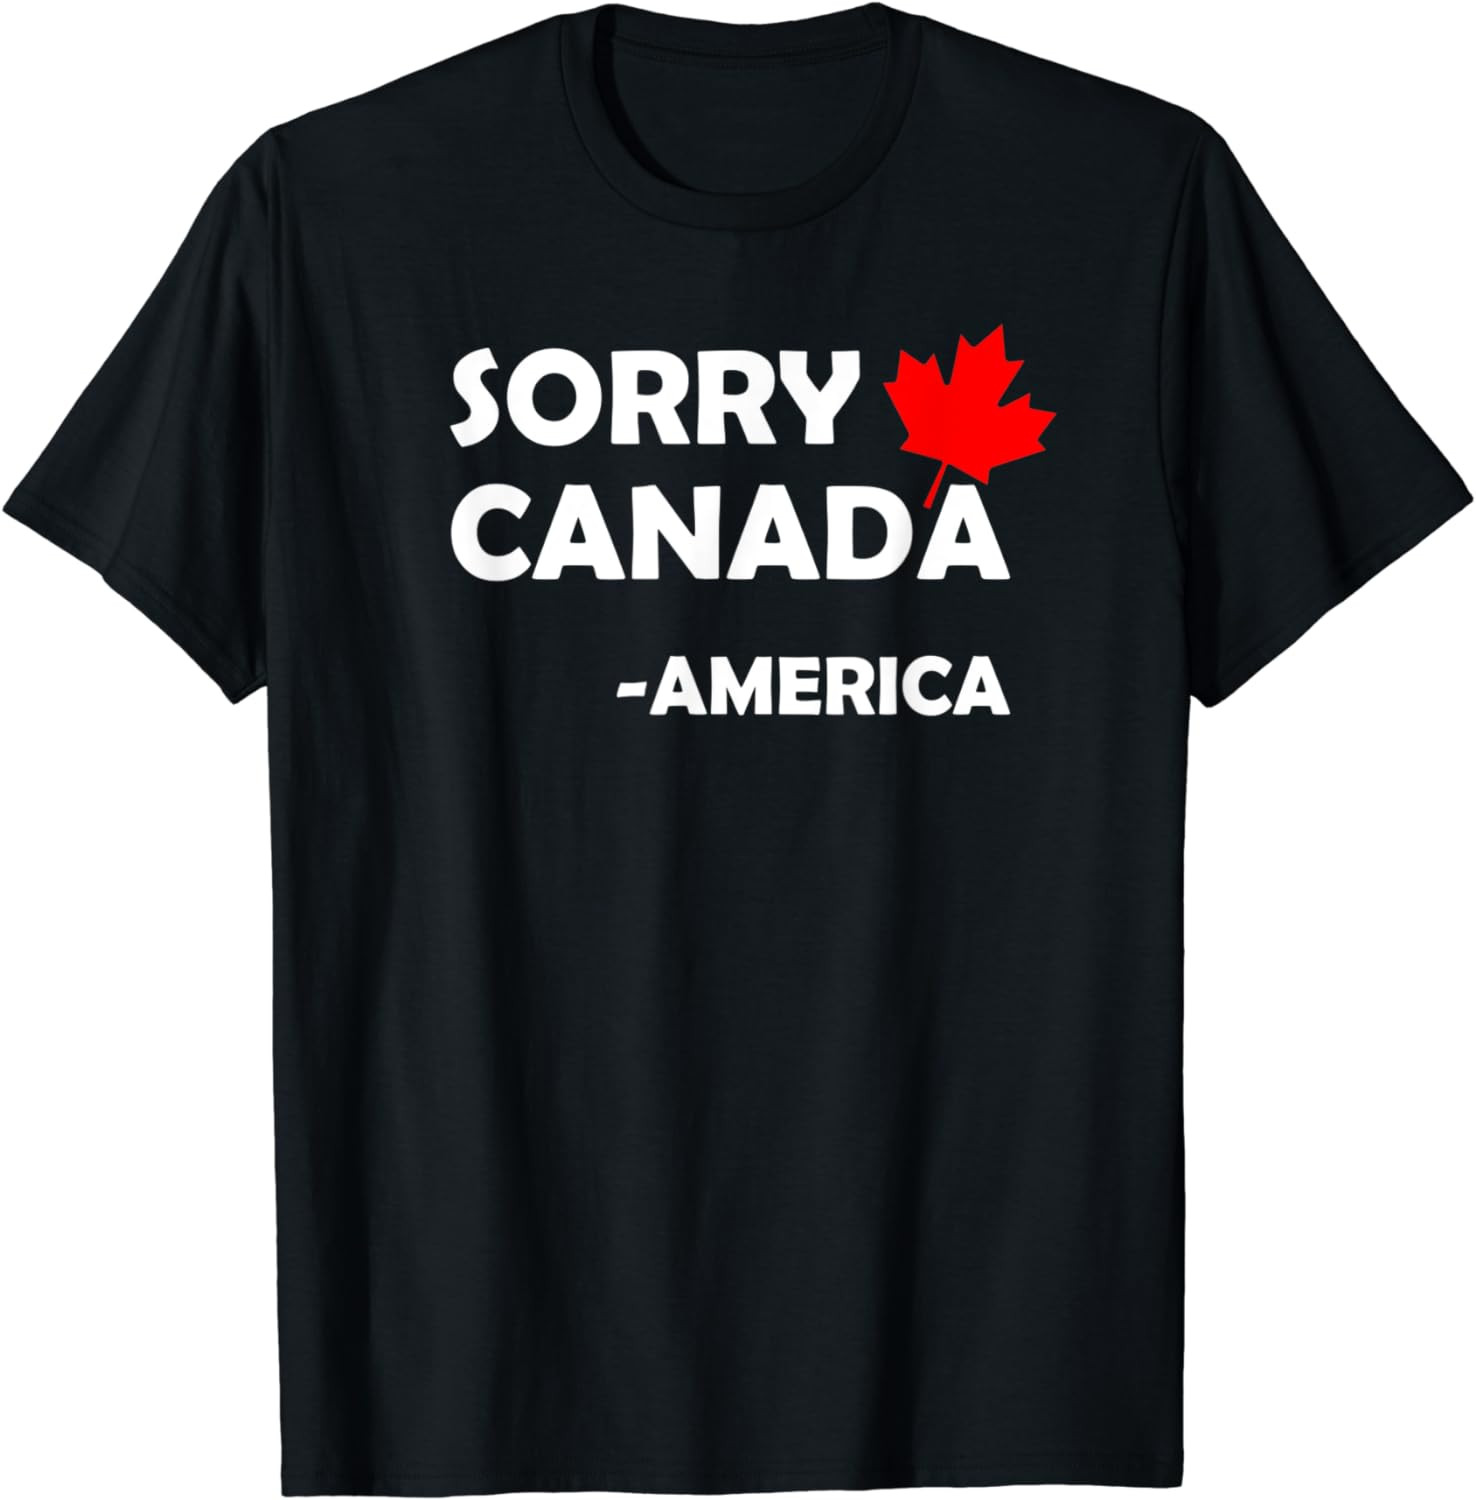 Sorry Canada T-Shirt With Red Maple Leaf